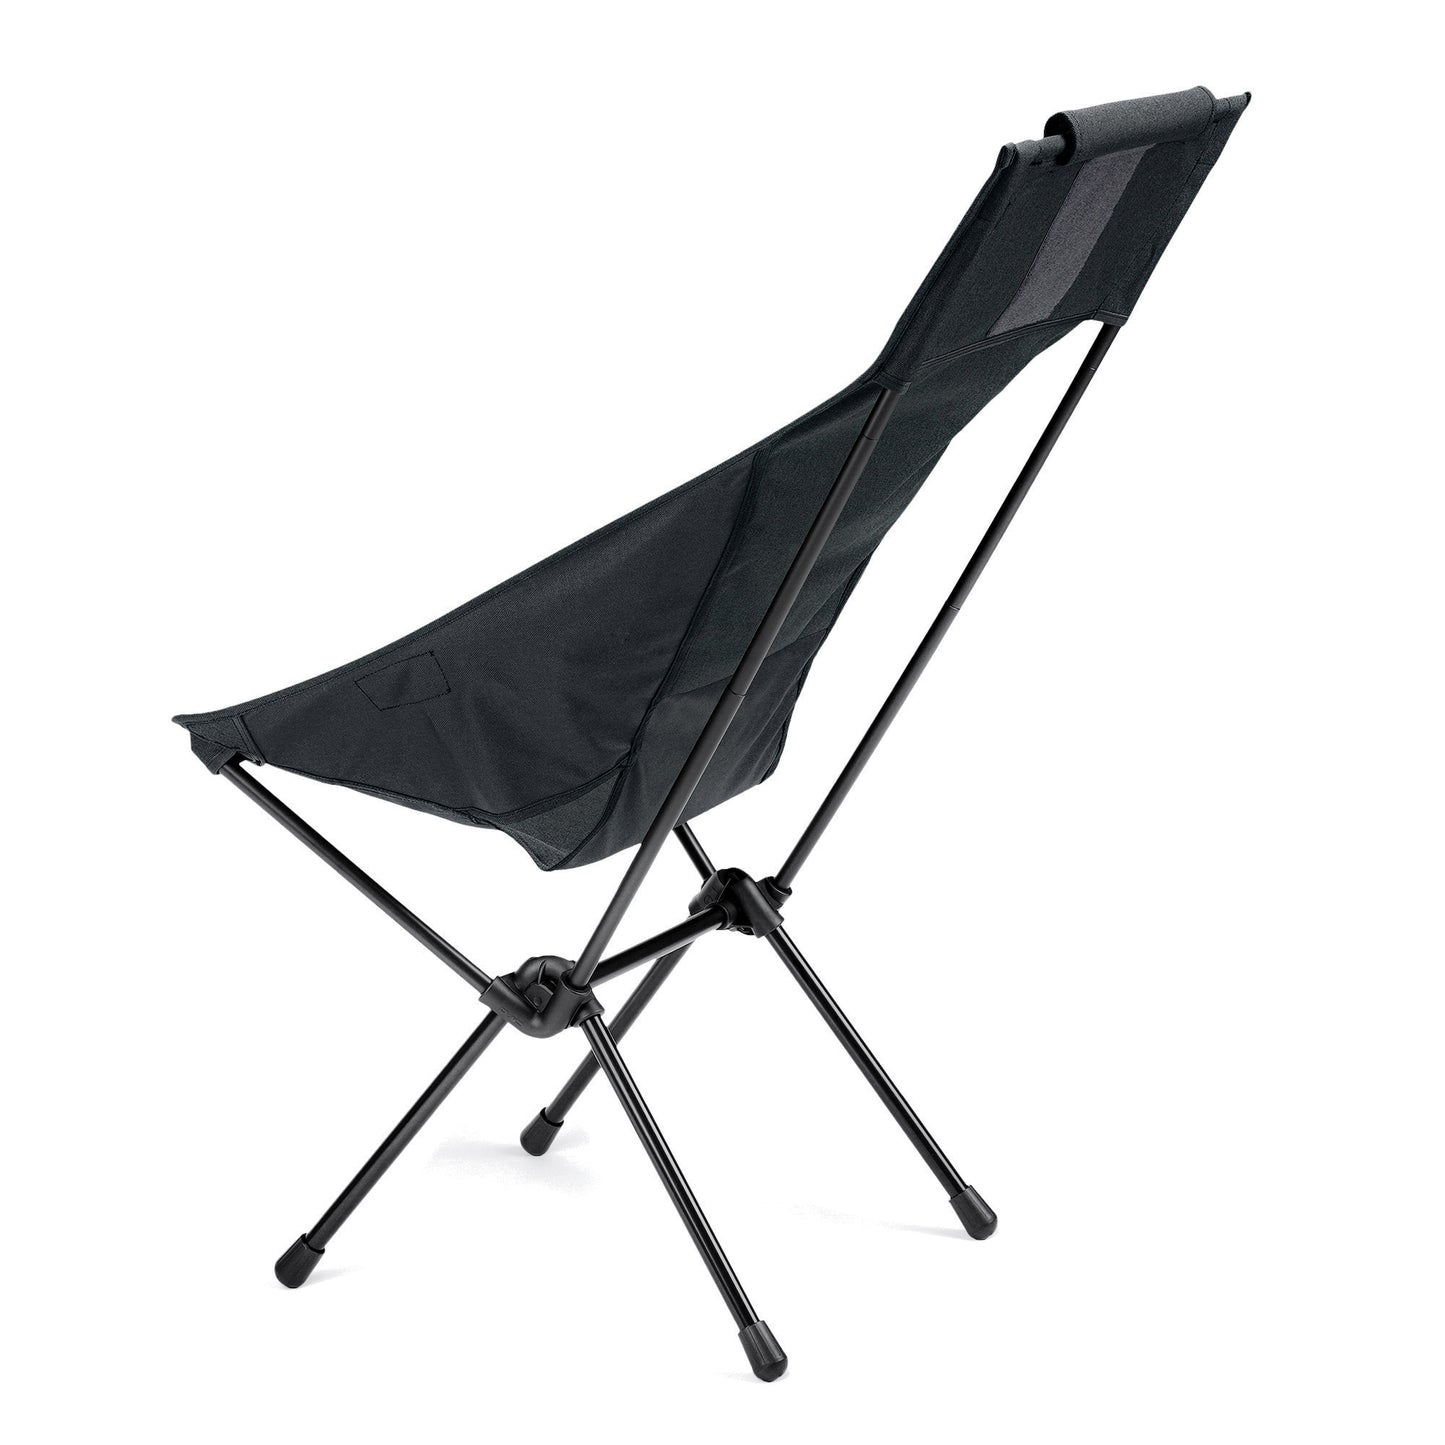 Sunset Chair Home - Black